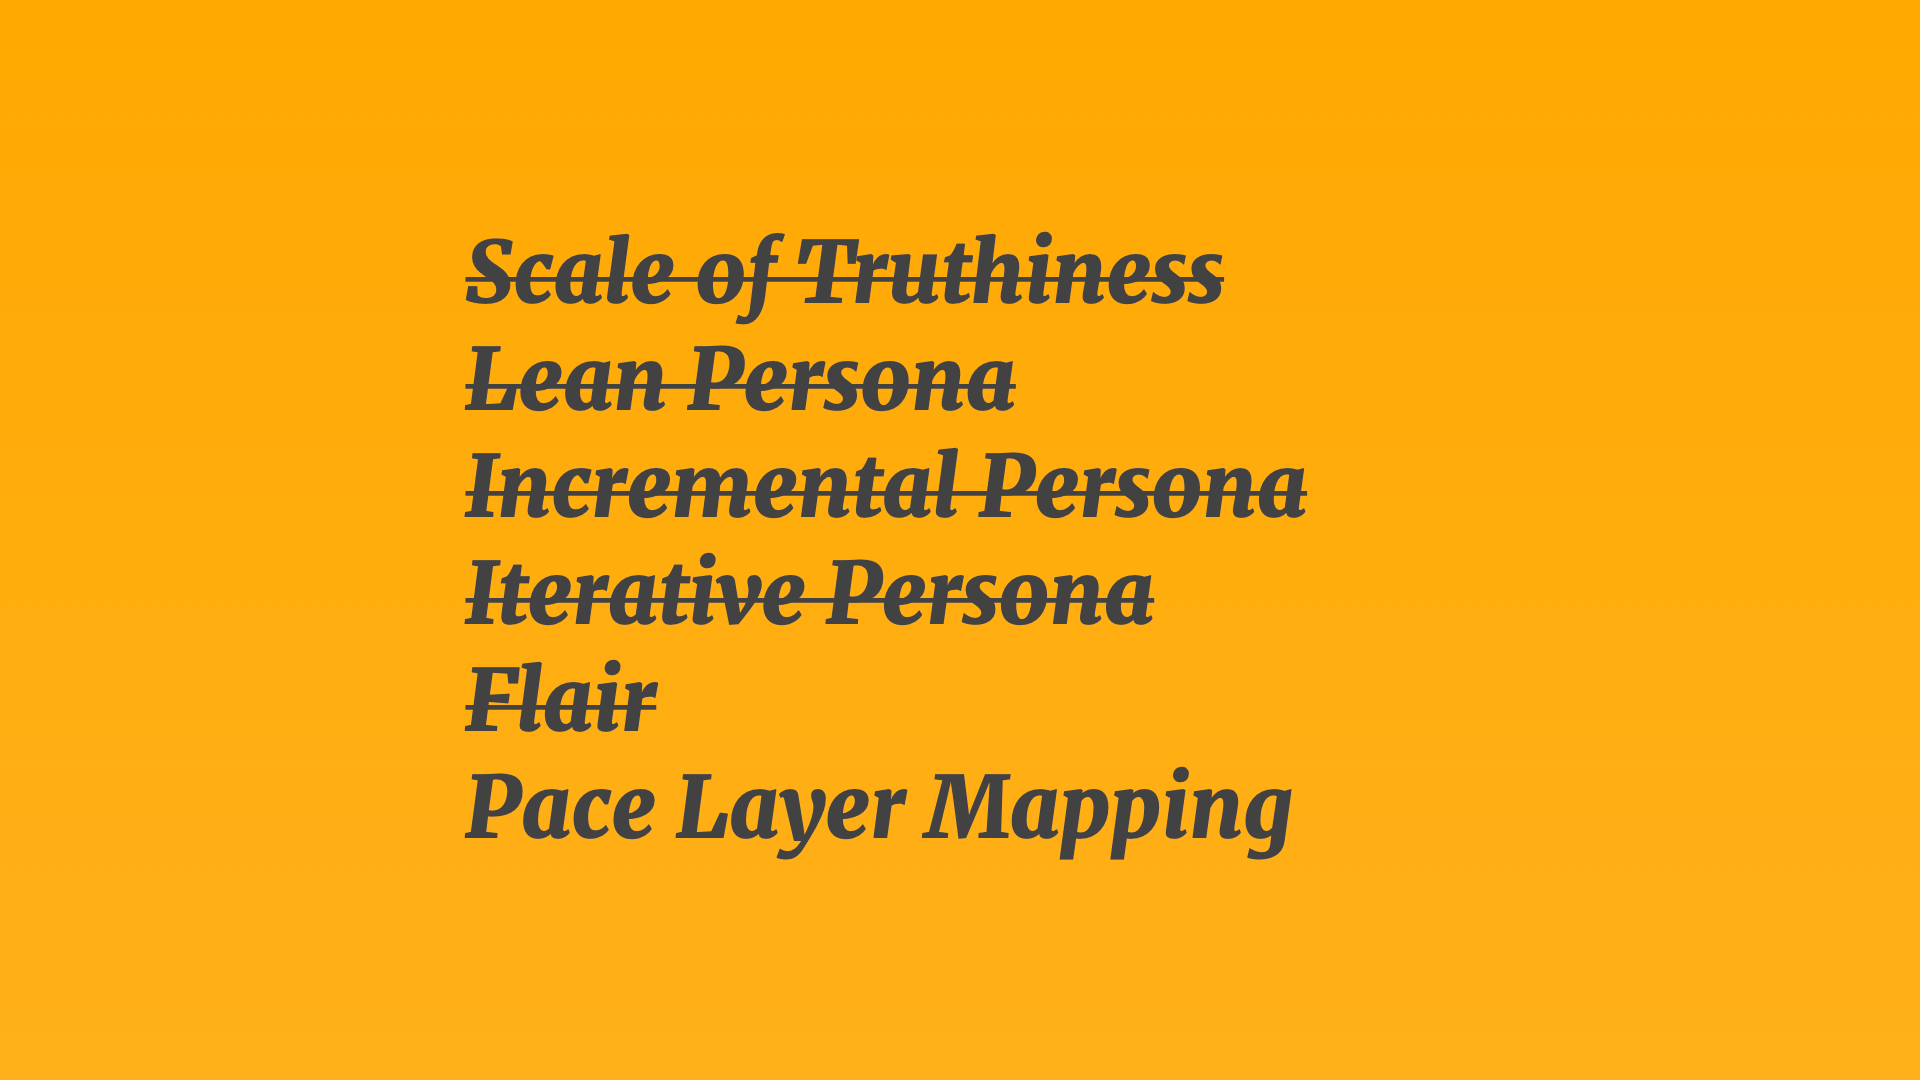 A text slide showing a list: Scale Of Truthiness, Lean Persona, Incremental Persona, Iterative Persona, Flair, and Pace Layer Mapping. All but the final 'Pace Layer Mapping' list item are crossed out.